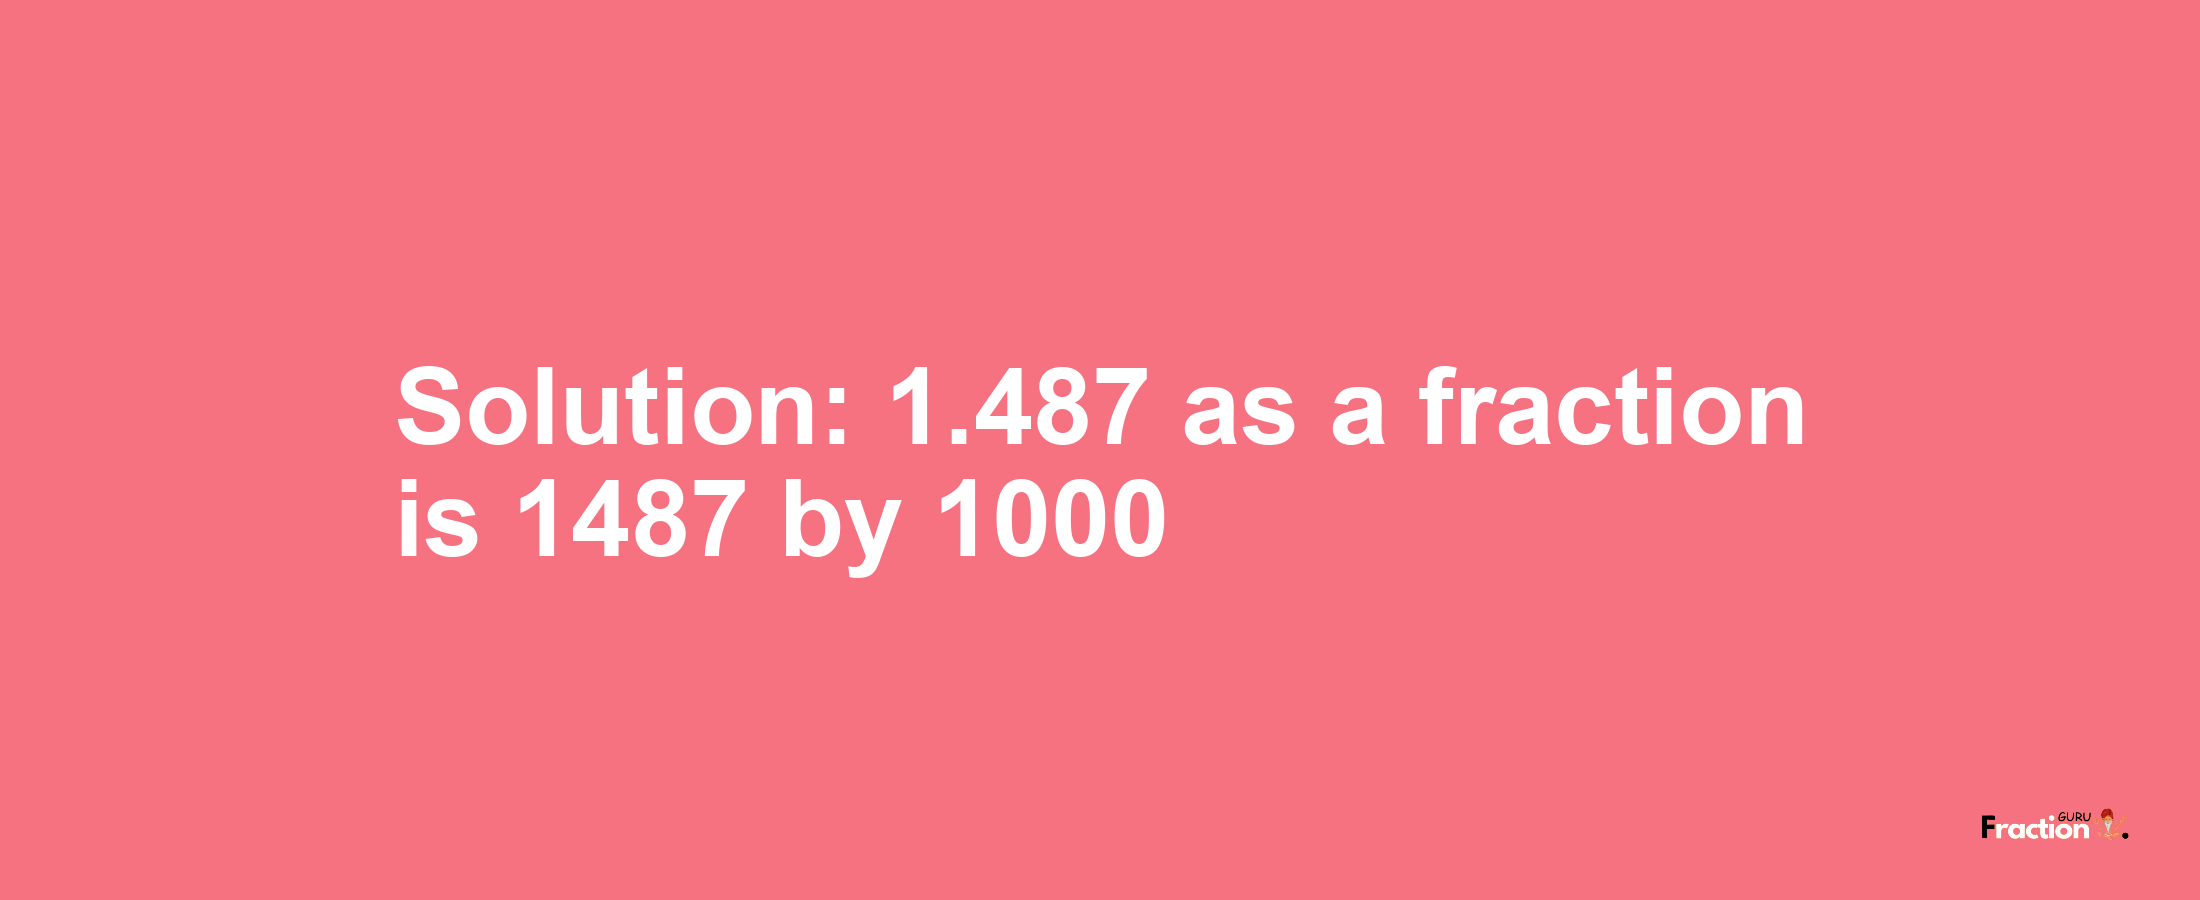 Solution:1.487 as a fraction is 1487/1000